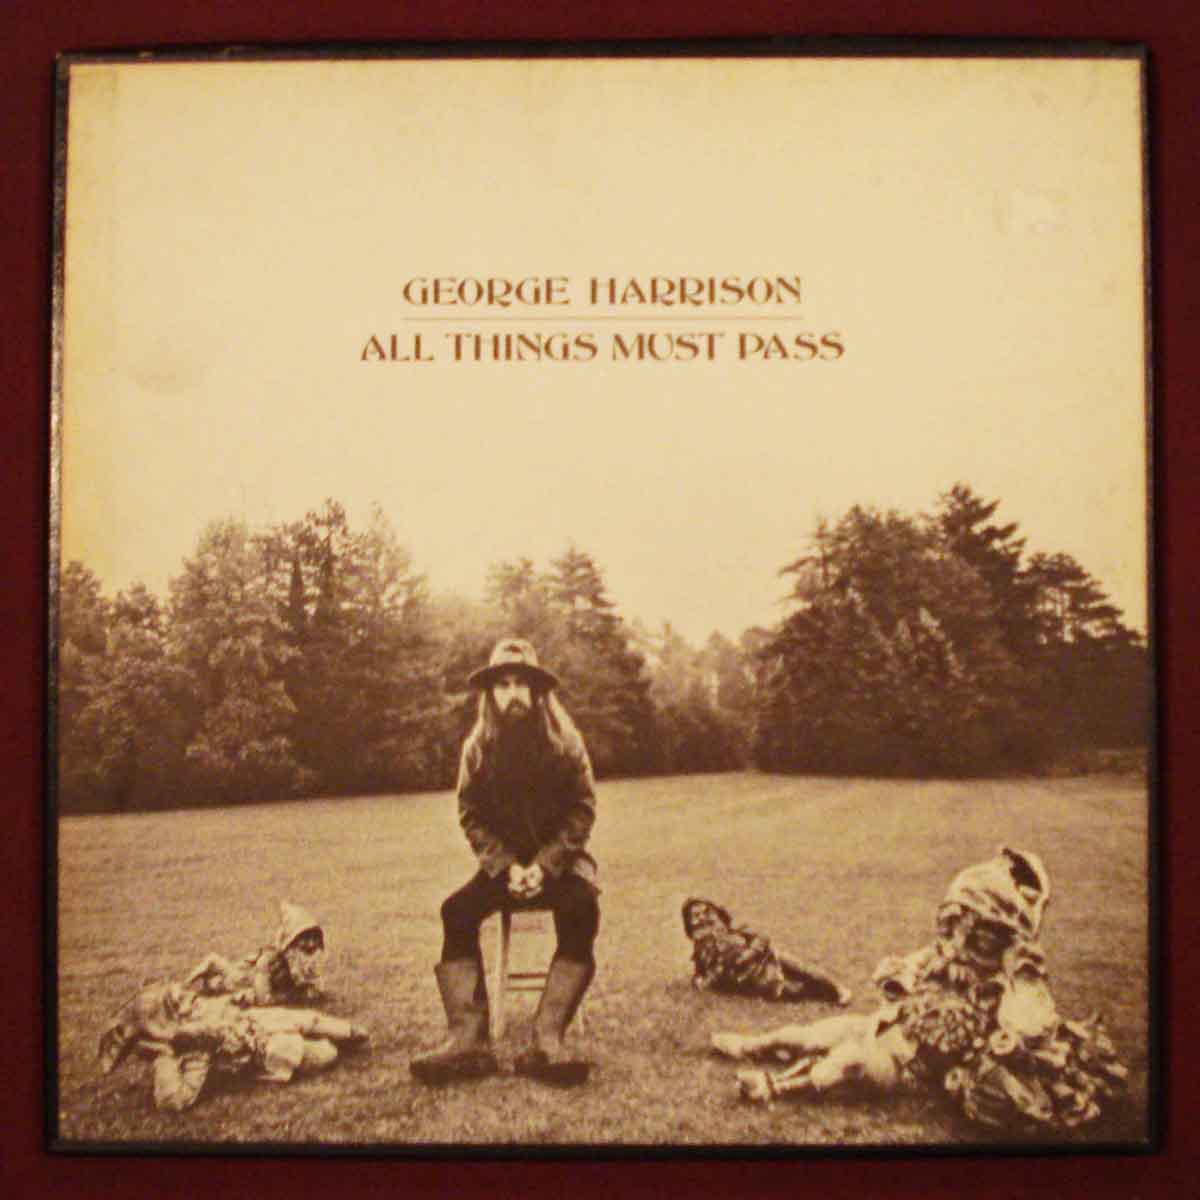 George Harrison - All Things Must Pass (1970) Vinyl LP 33rpm, STCH639